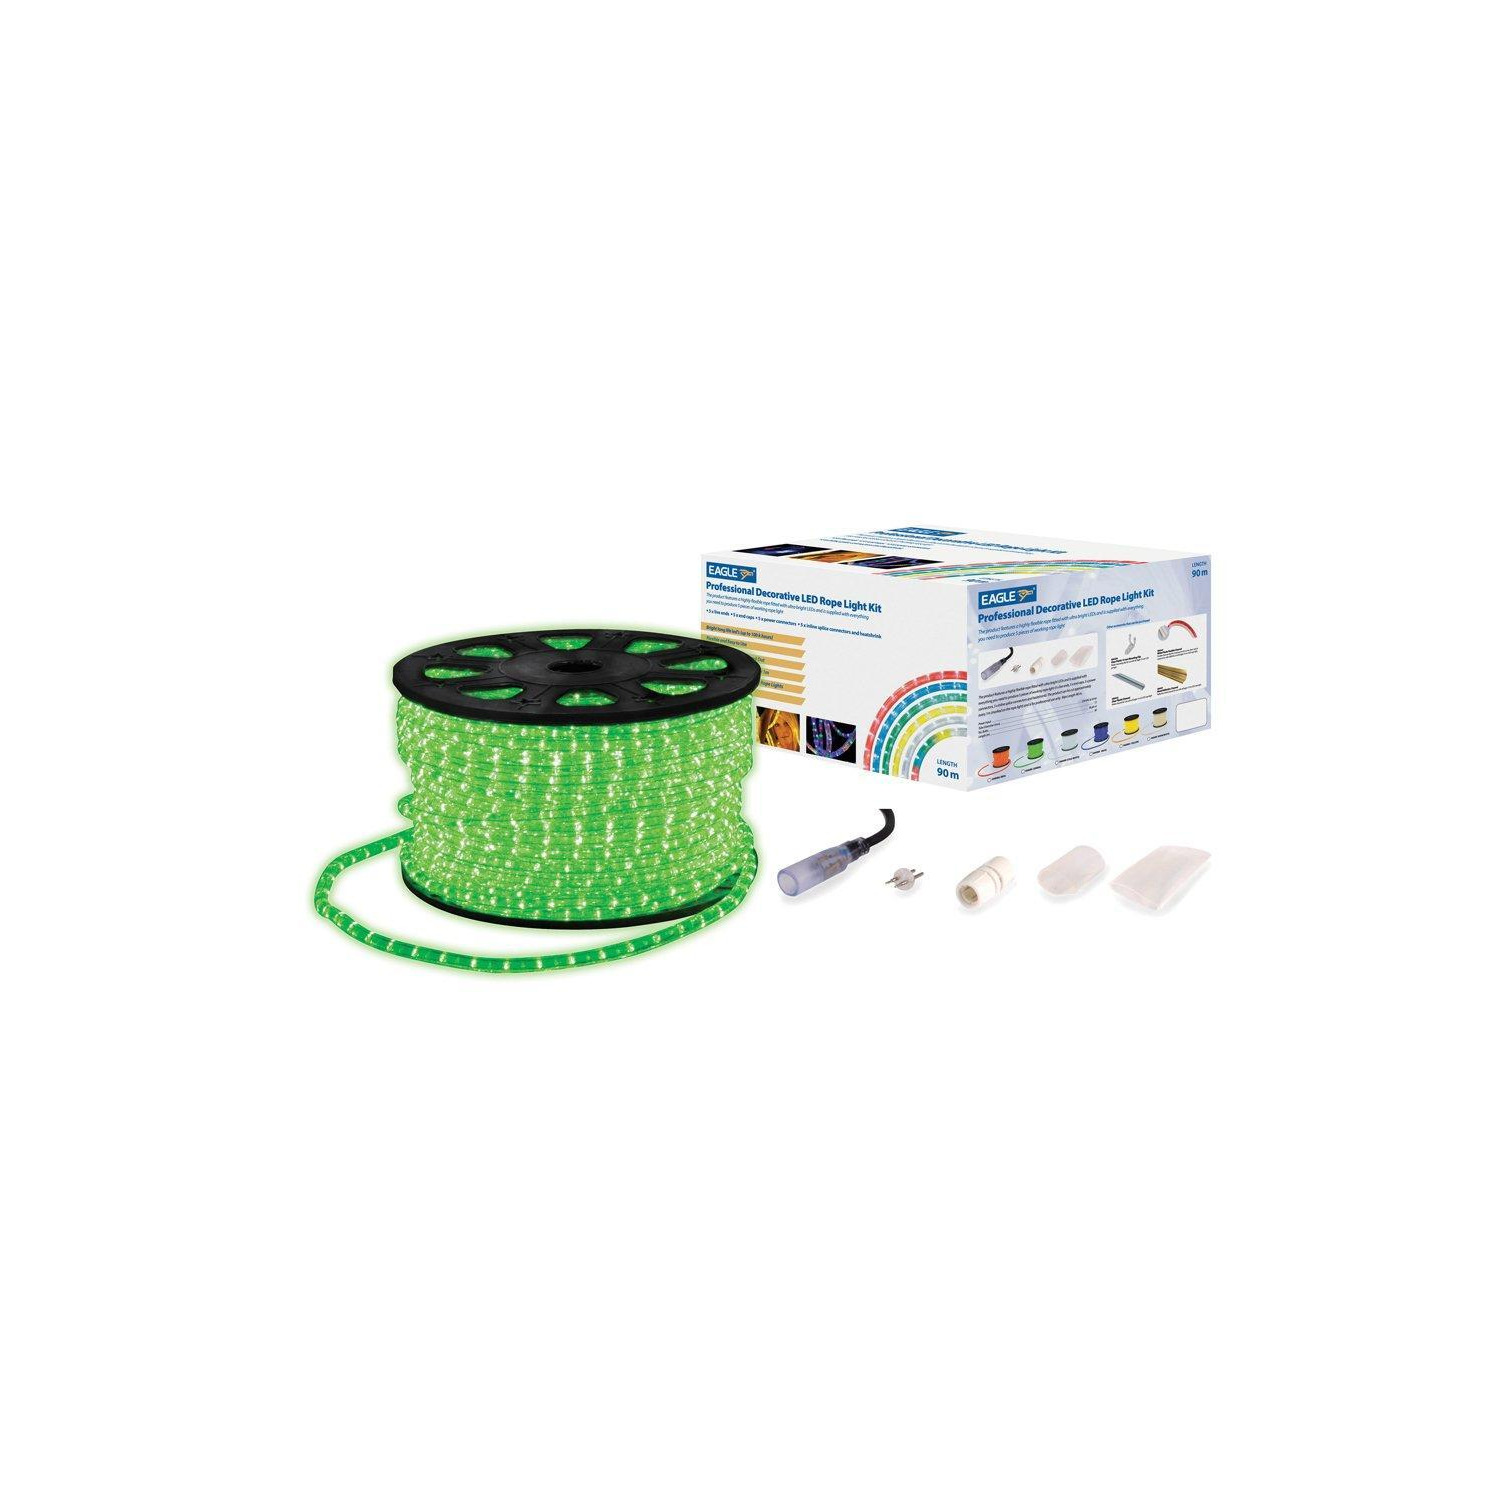 Static LED Rope Light Kit With Wiring Accessories Kit 90m Green - image 1